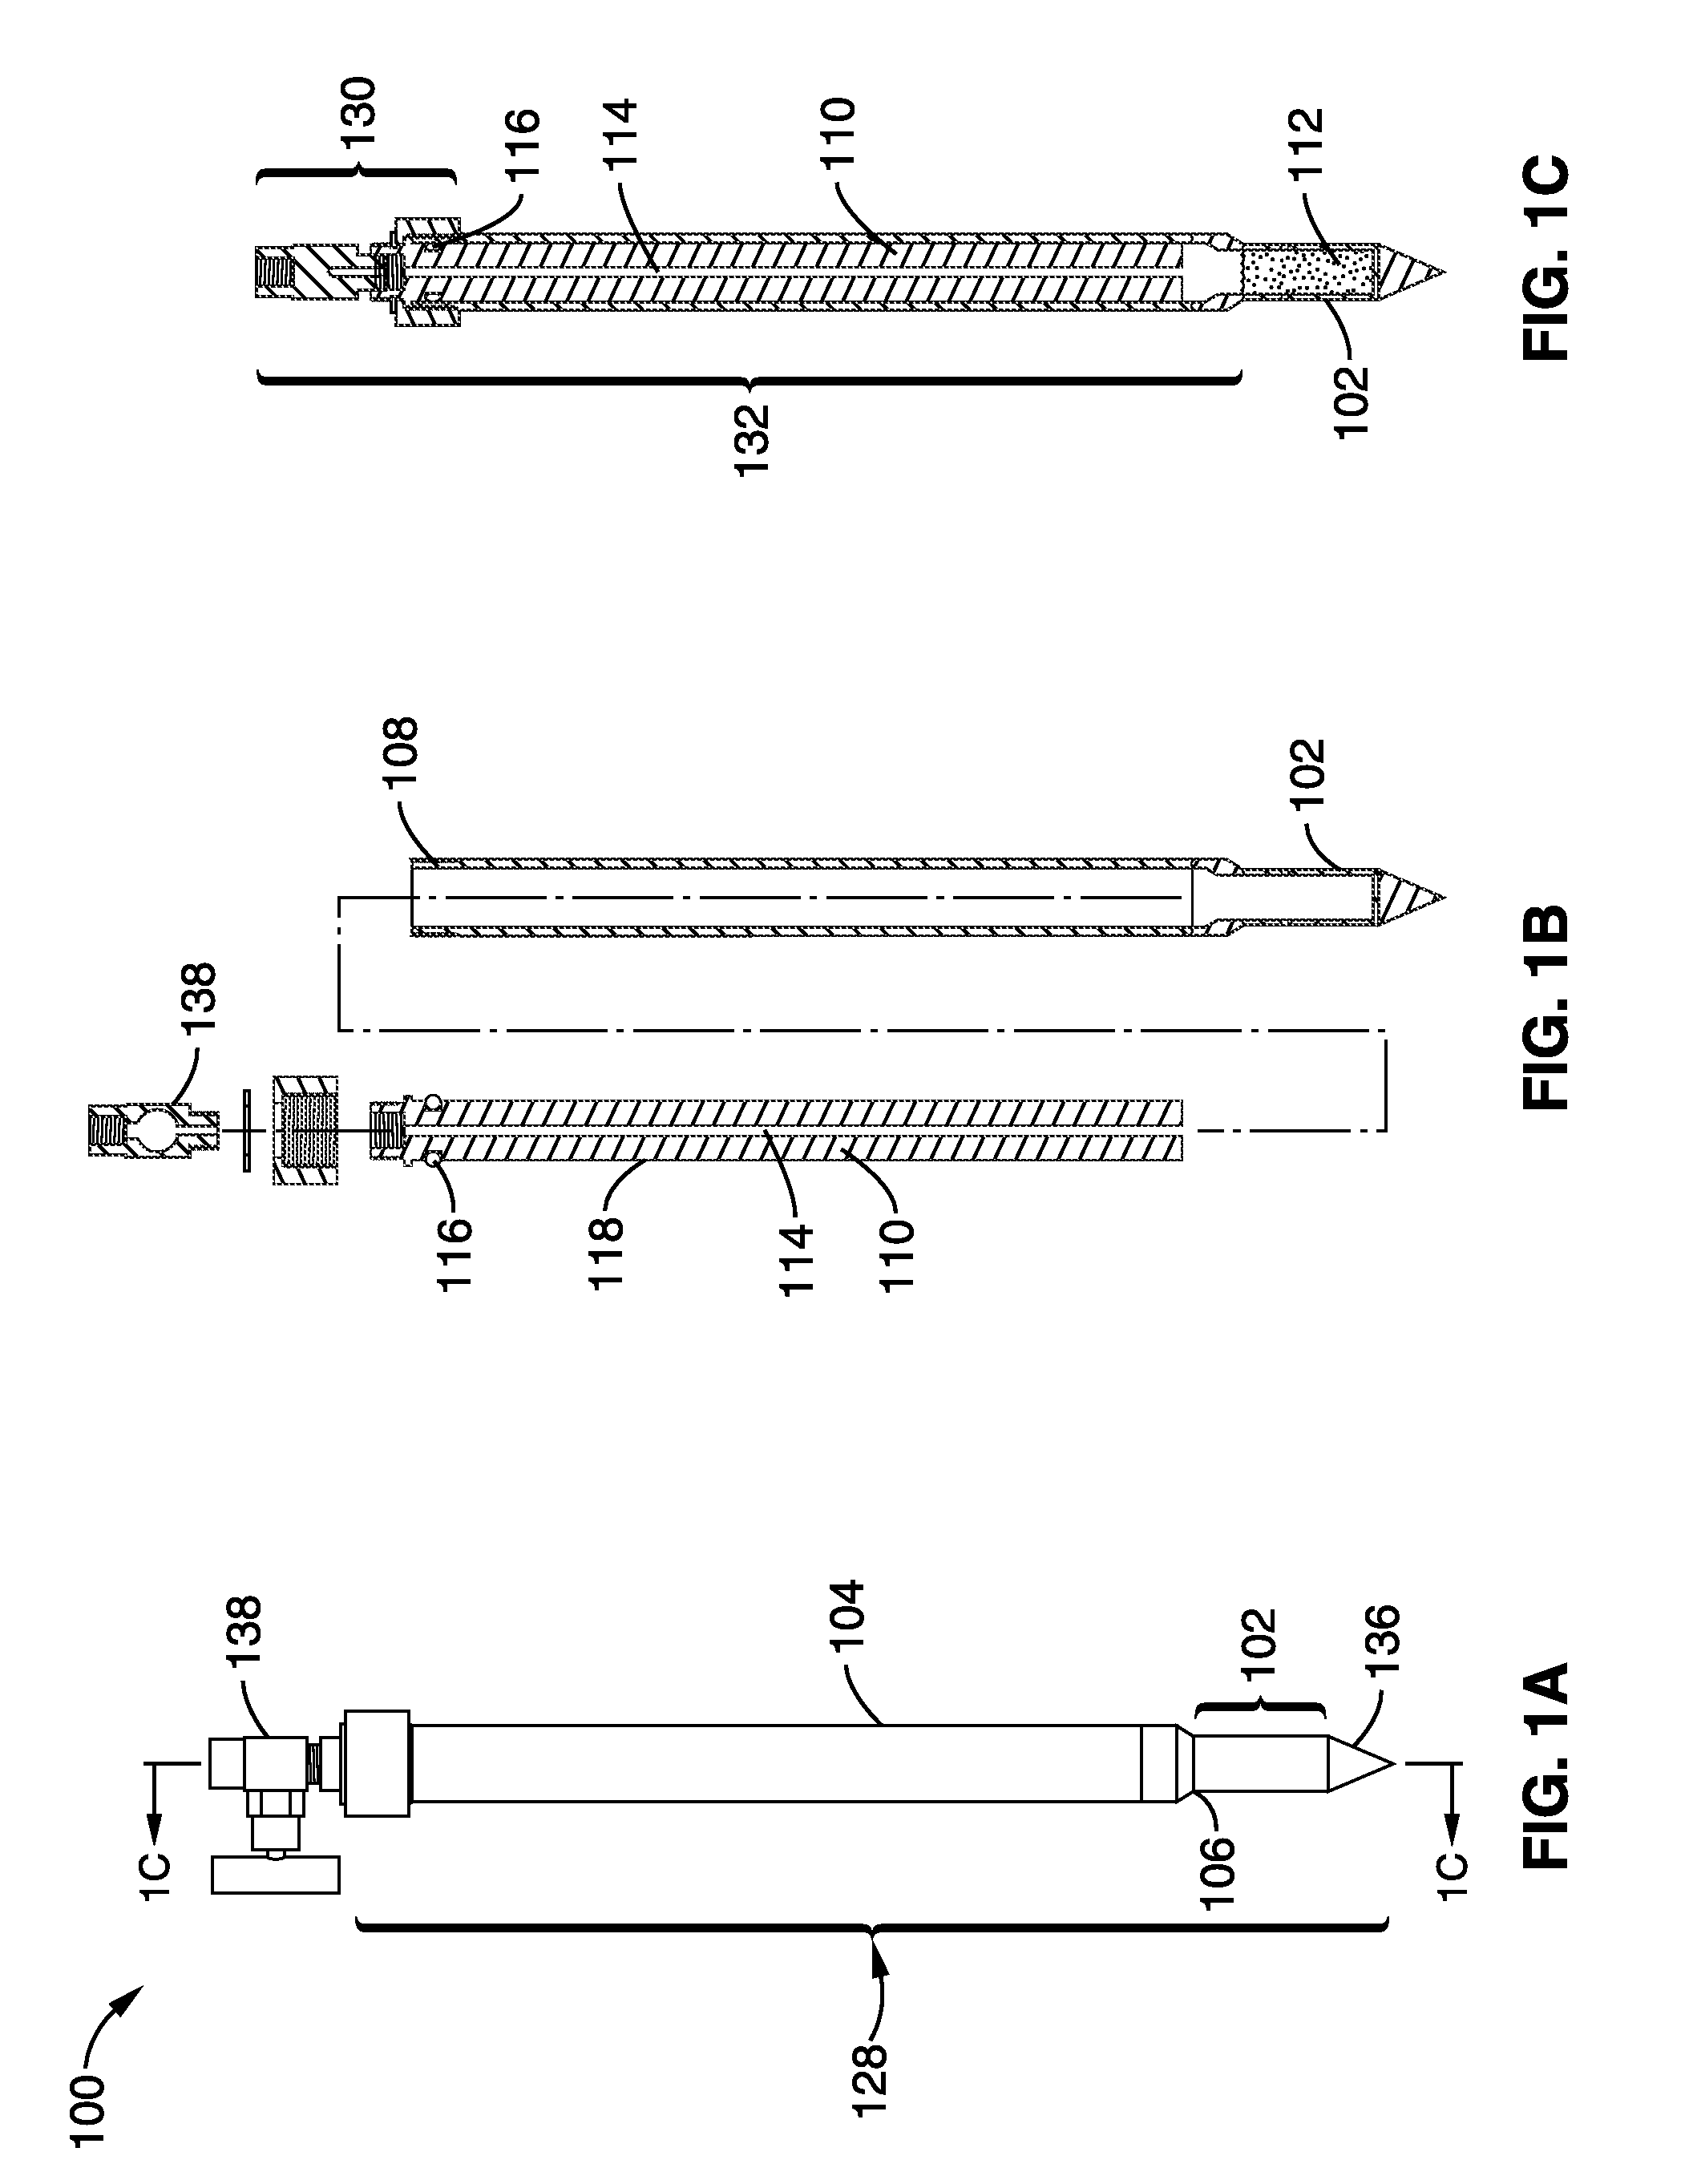 In-situ soil nitrate ion concentration sensor